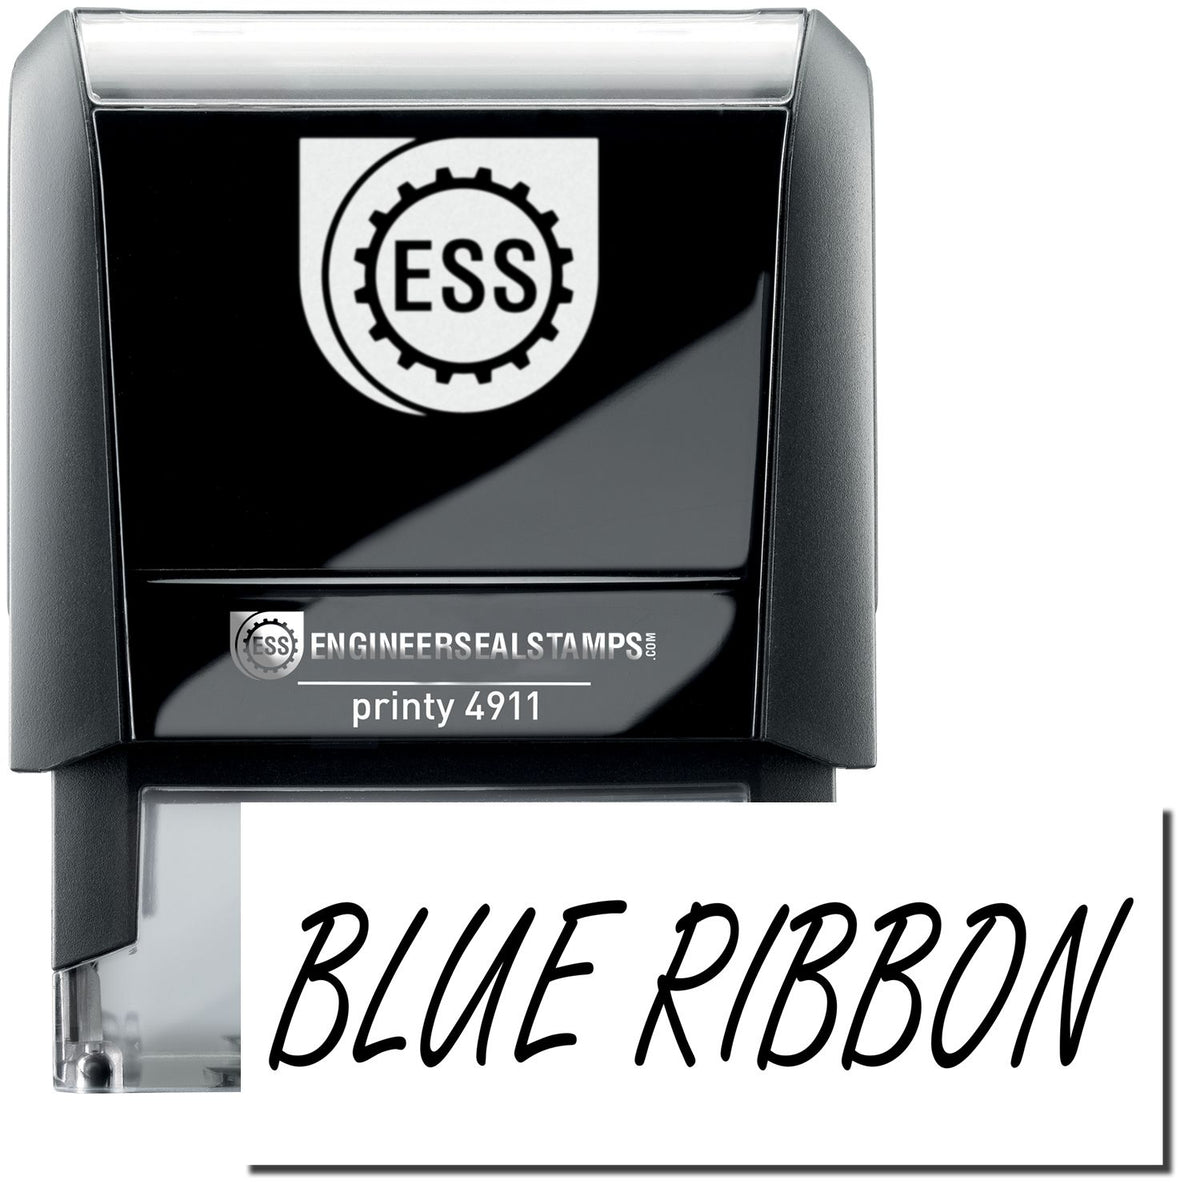 A self-inking stamp with a stamped image showing how the text &quot;BLUE RIBBON&quot; is displayed after stamping.